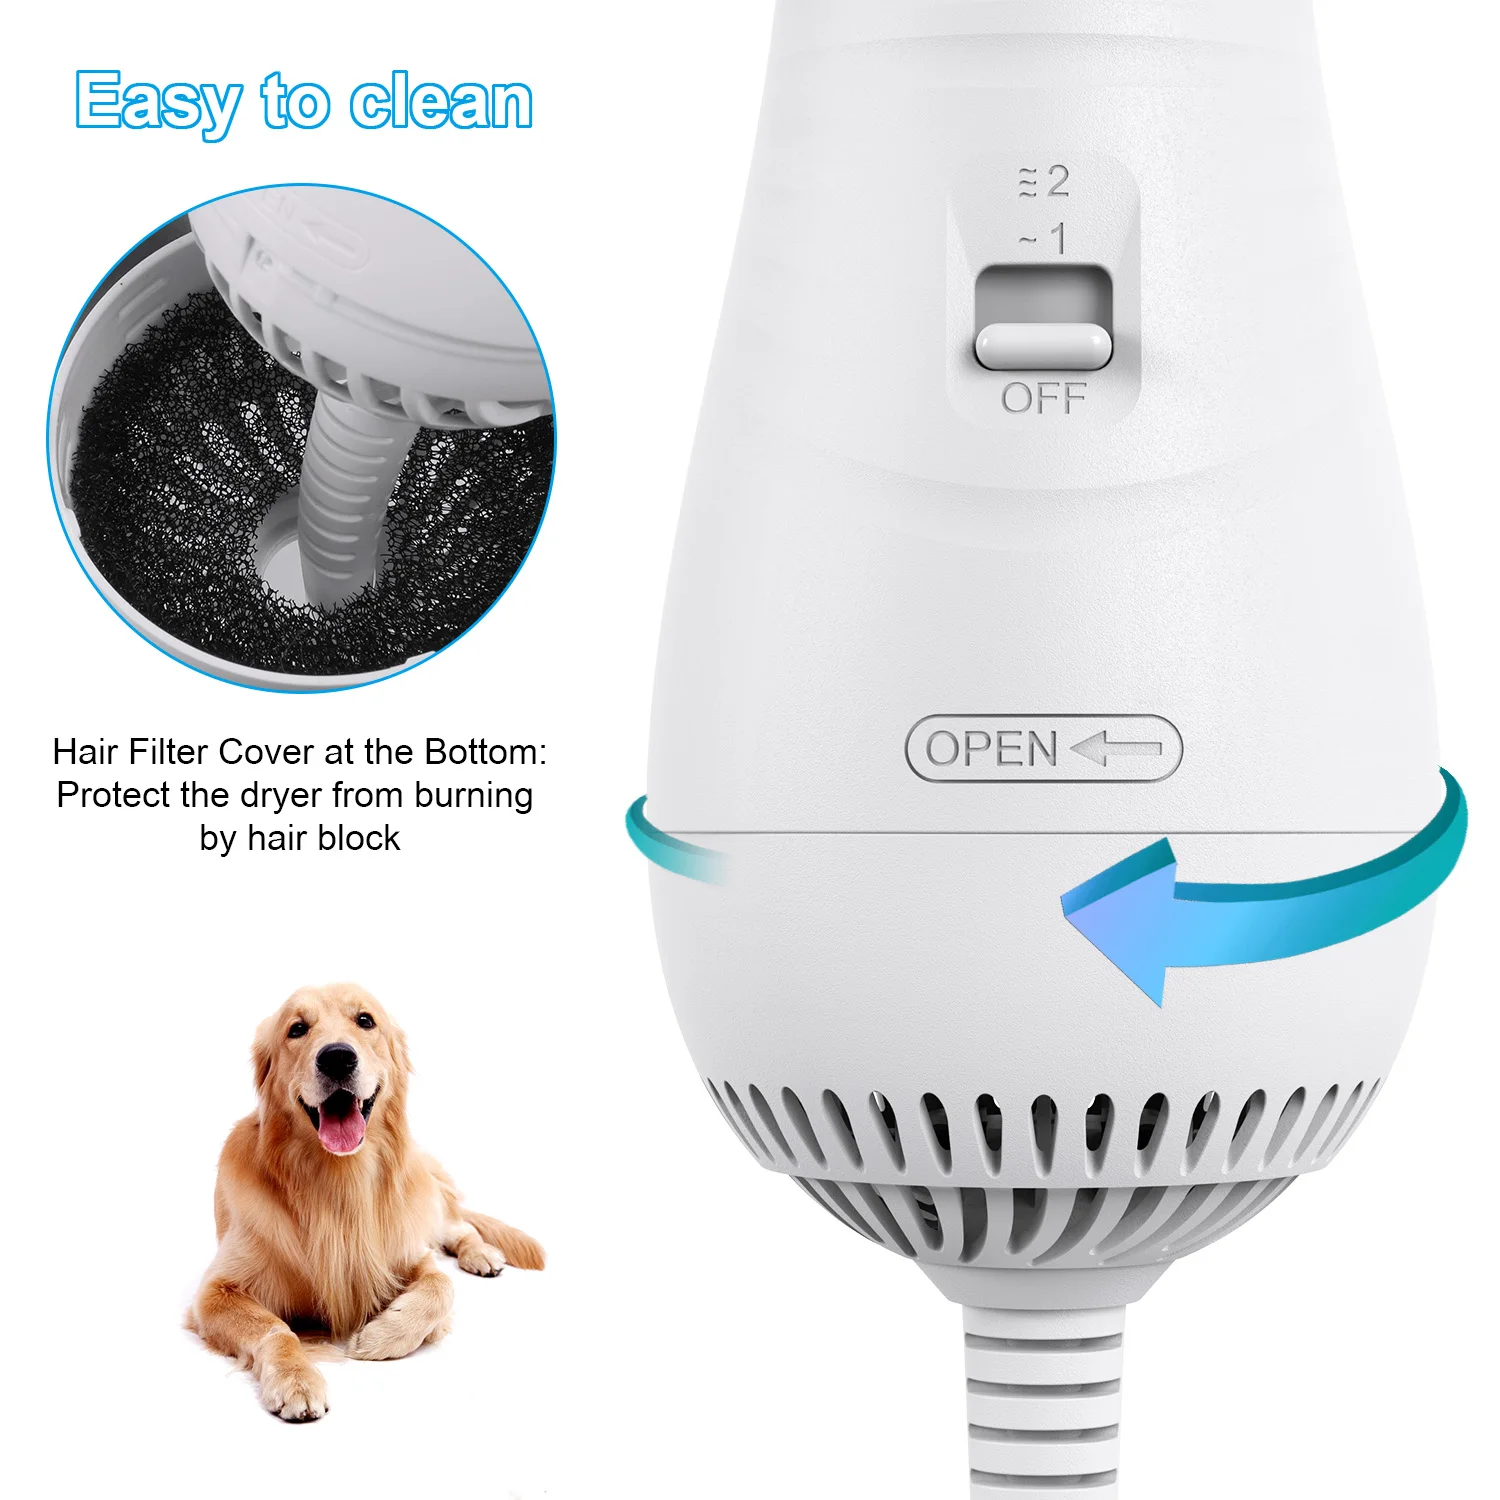 

Dog Grooming Hair Dryer Blower Pet 2 In 1 Power Supply AC220-240V Negative Ions Gently Blow Dry Not Harm The Skin For Pet Dogs